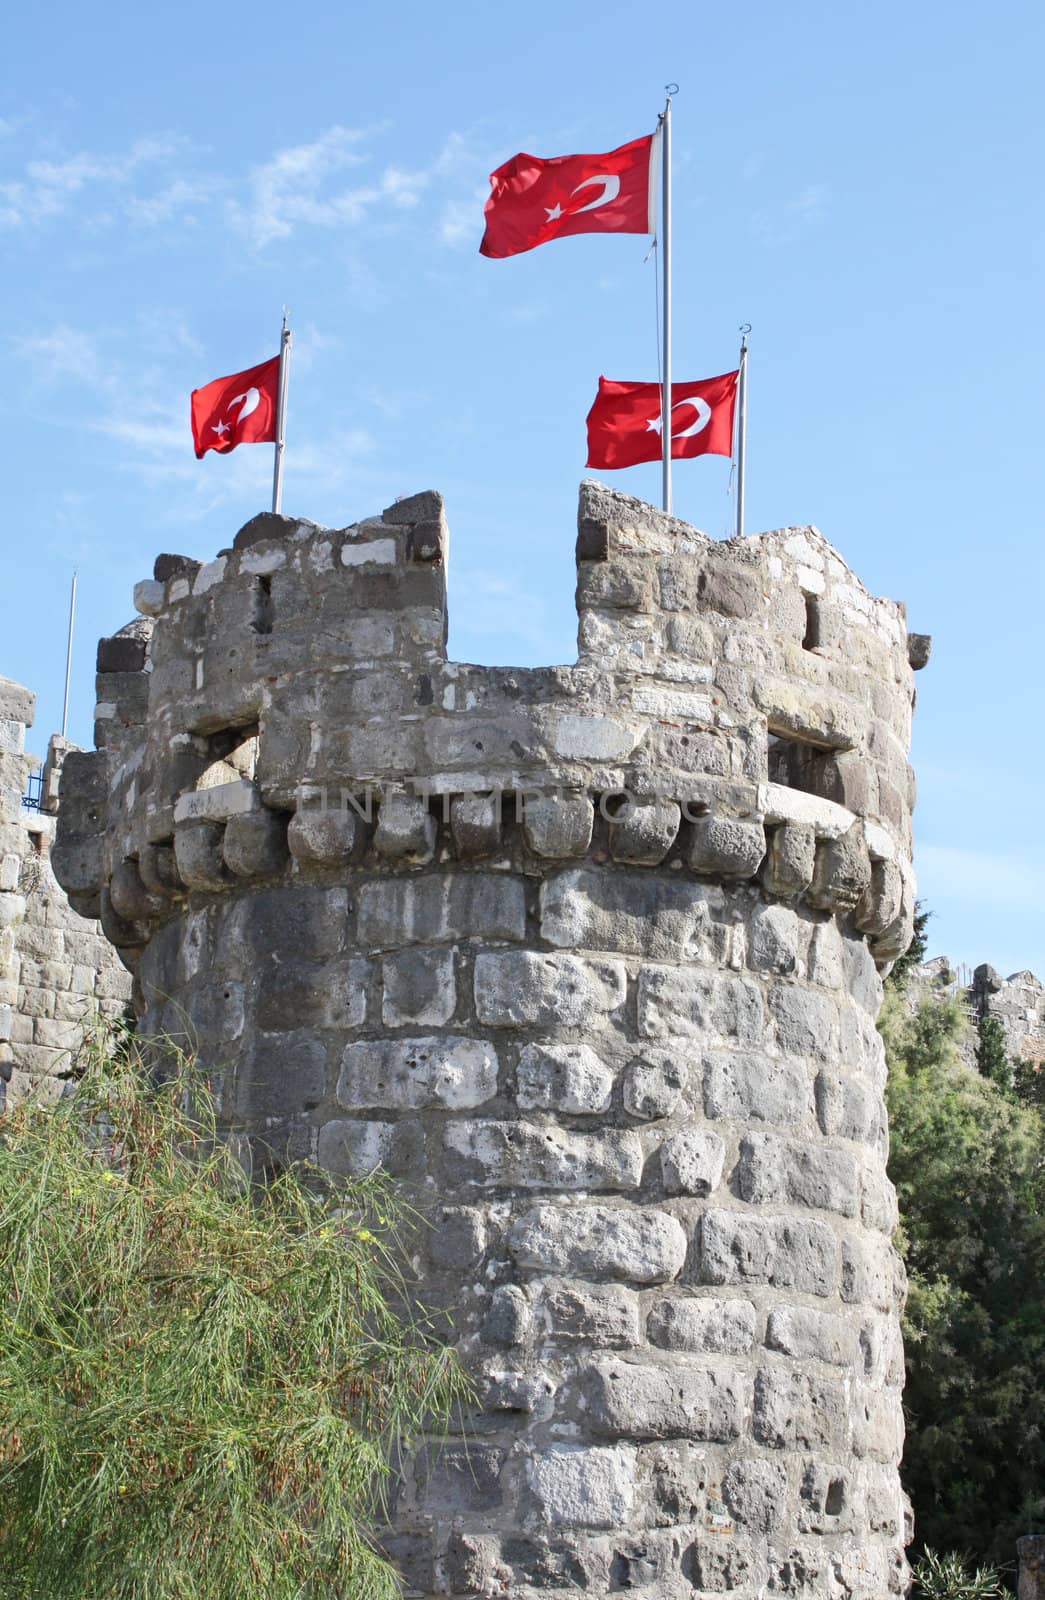 Tower in the medieval Castle of St Peter in Bodrum, Turkey. Built by the Knights Hospitaller of Rhodes.